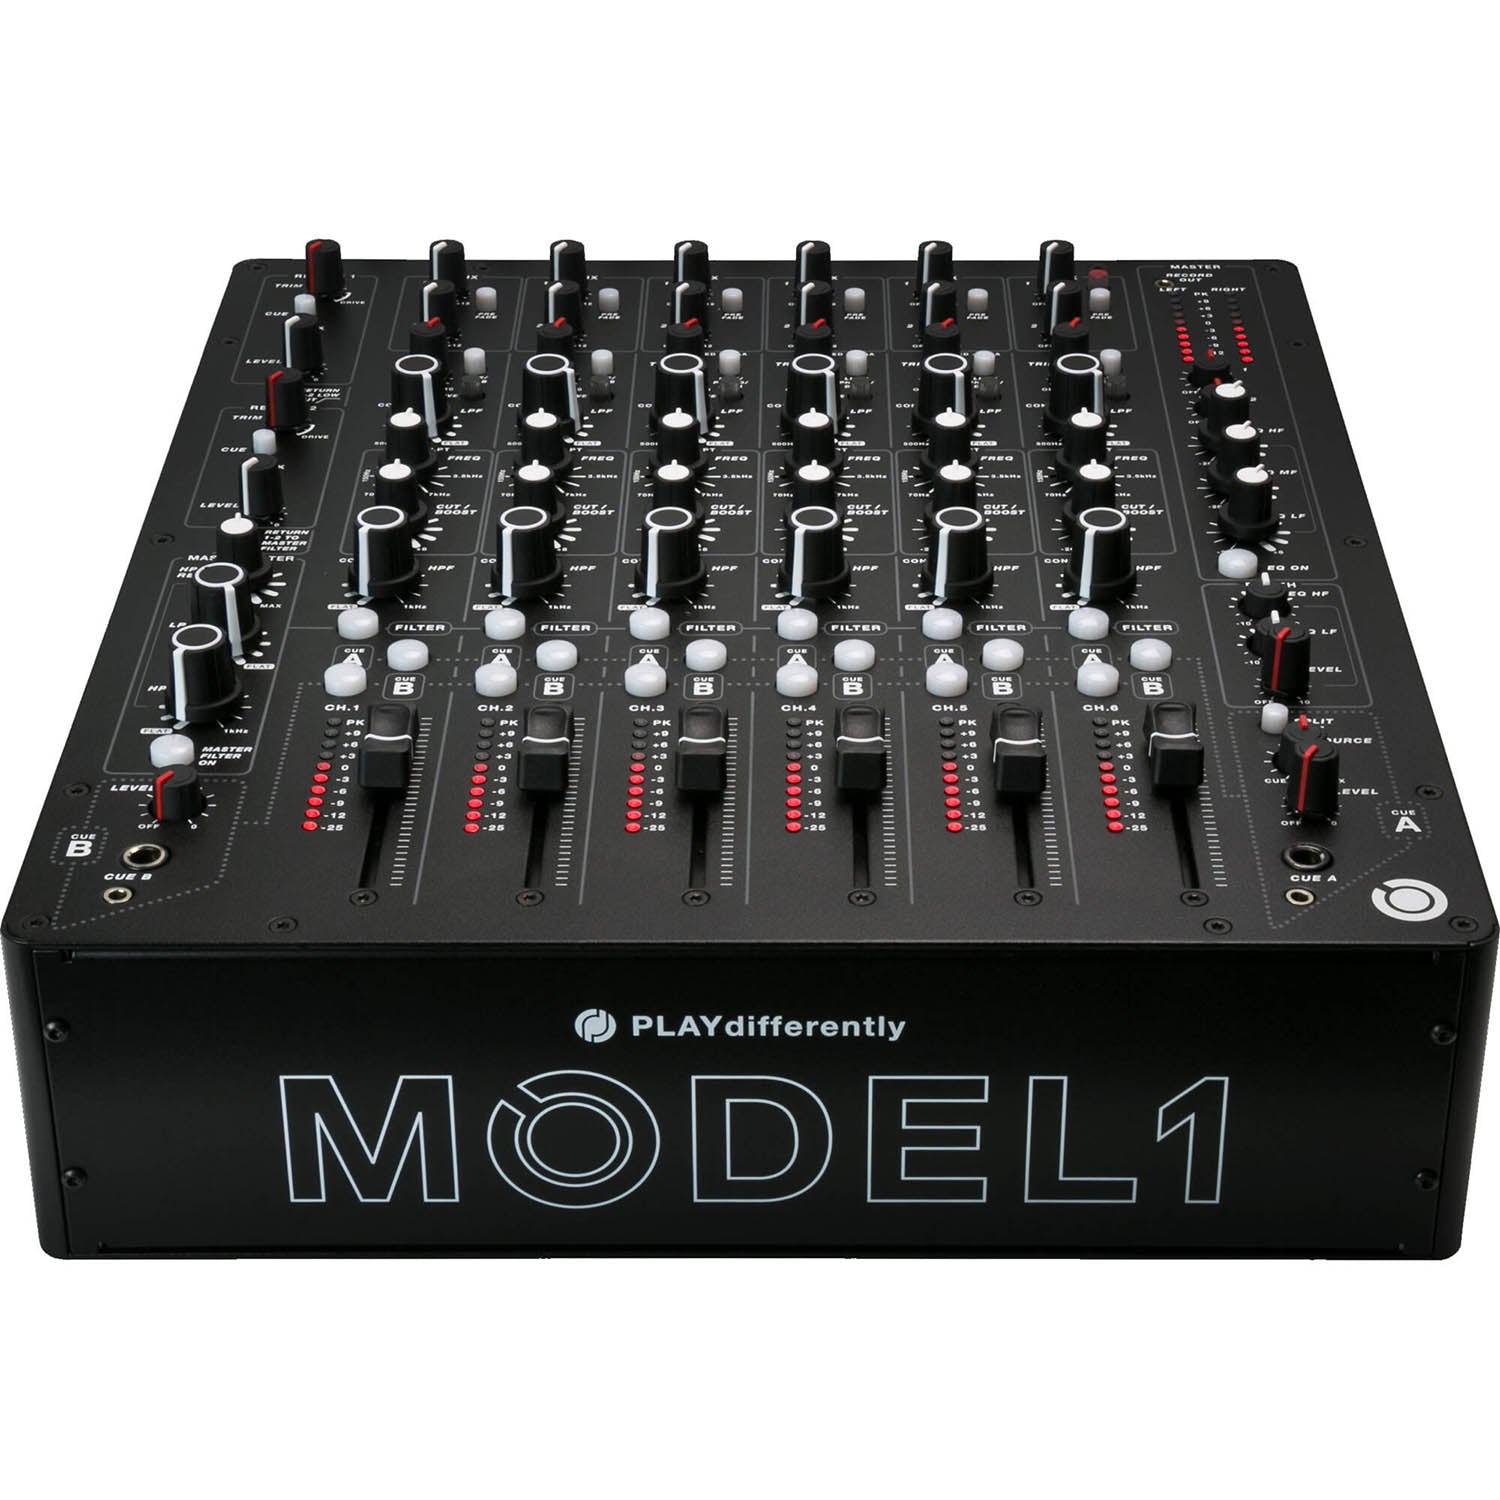 PLAYdifferently MODEL 1 Purely Analogue Mixer - Hollywood DJ